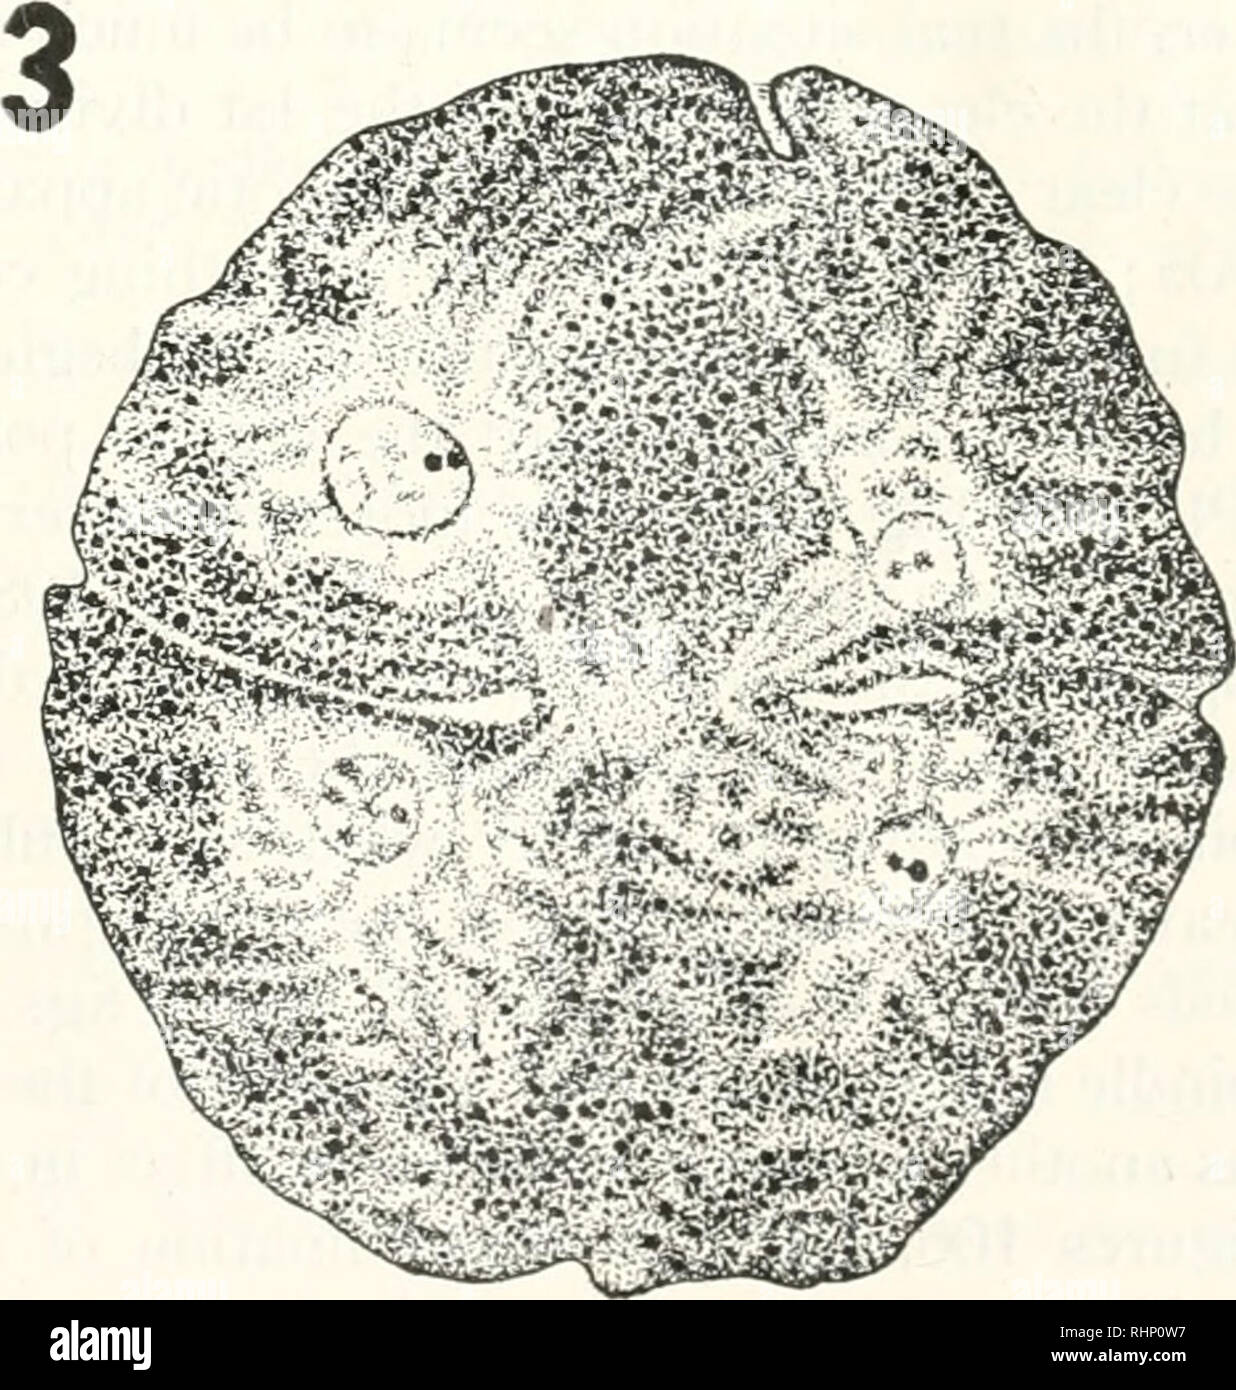 . The Biological bulletin. Biology; Zoology; Biology; Marine Biology. FIGURE 12. Sections of an egg of Strongylocentrotiis pulchcrriinus in the second division, the first cleavage of which was suppressed by ether. Fixed in chrome-formol mixture, la and b are two successive sections of an egg showing two spindles and four asters (the slit in the middle of b is an artefact). Two is an egg cleaving into two binucleate cells with the bend- ing of the spindles. Three is another egg in a slightly later stage with sharply bent spindles, the spindles being much more vague in this case.. Please note  Stock Photo